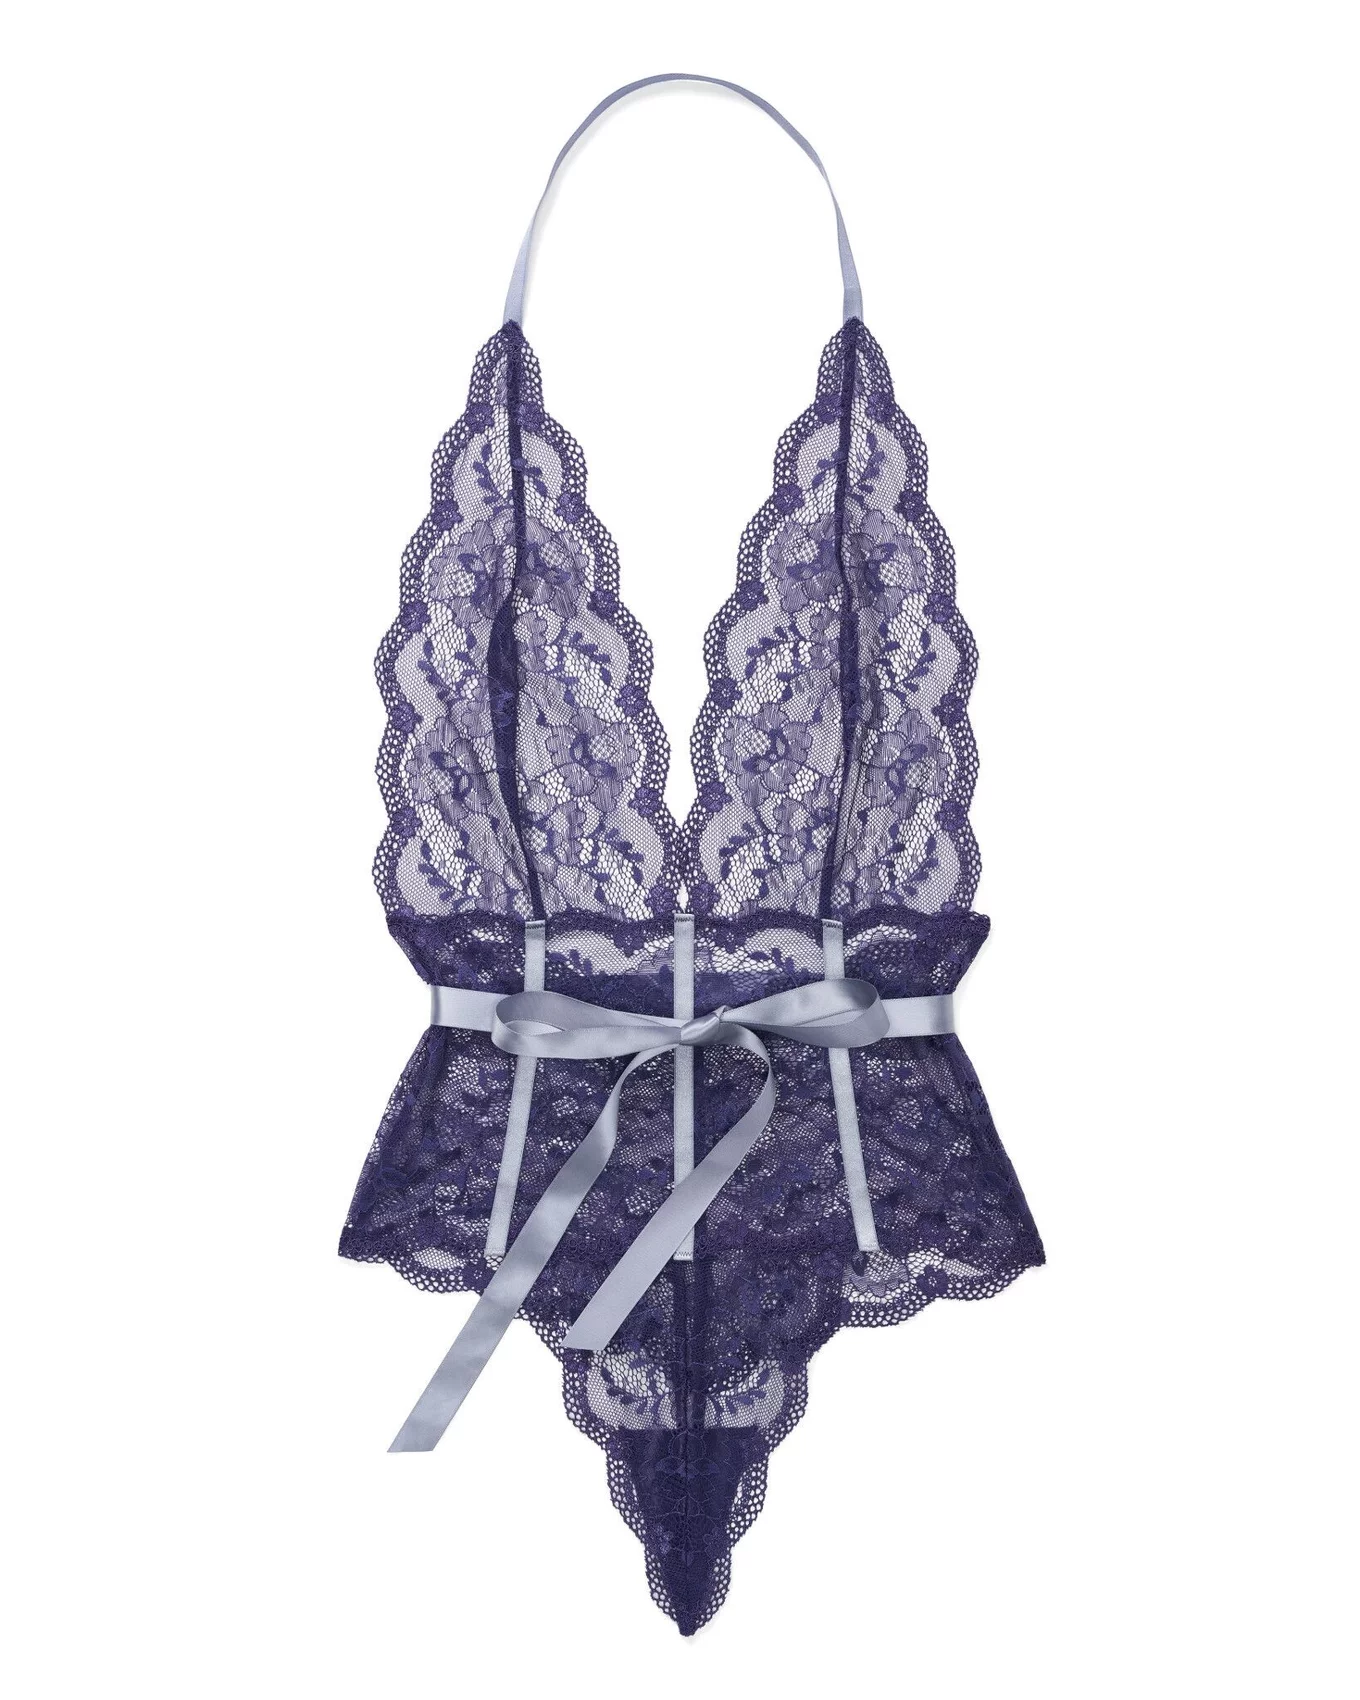 Second Life Marketplace - Sweet Nothings Lingerie - Purple